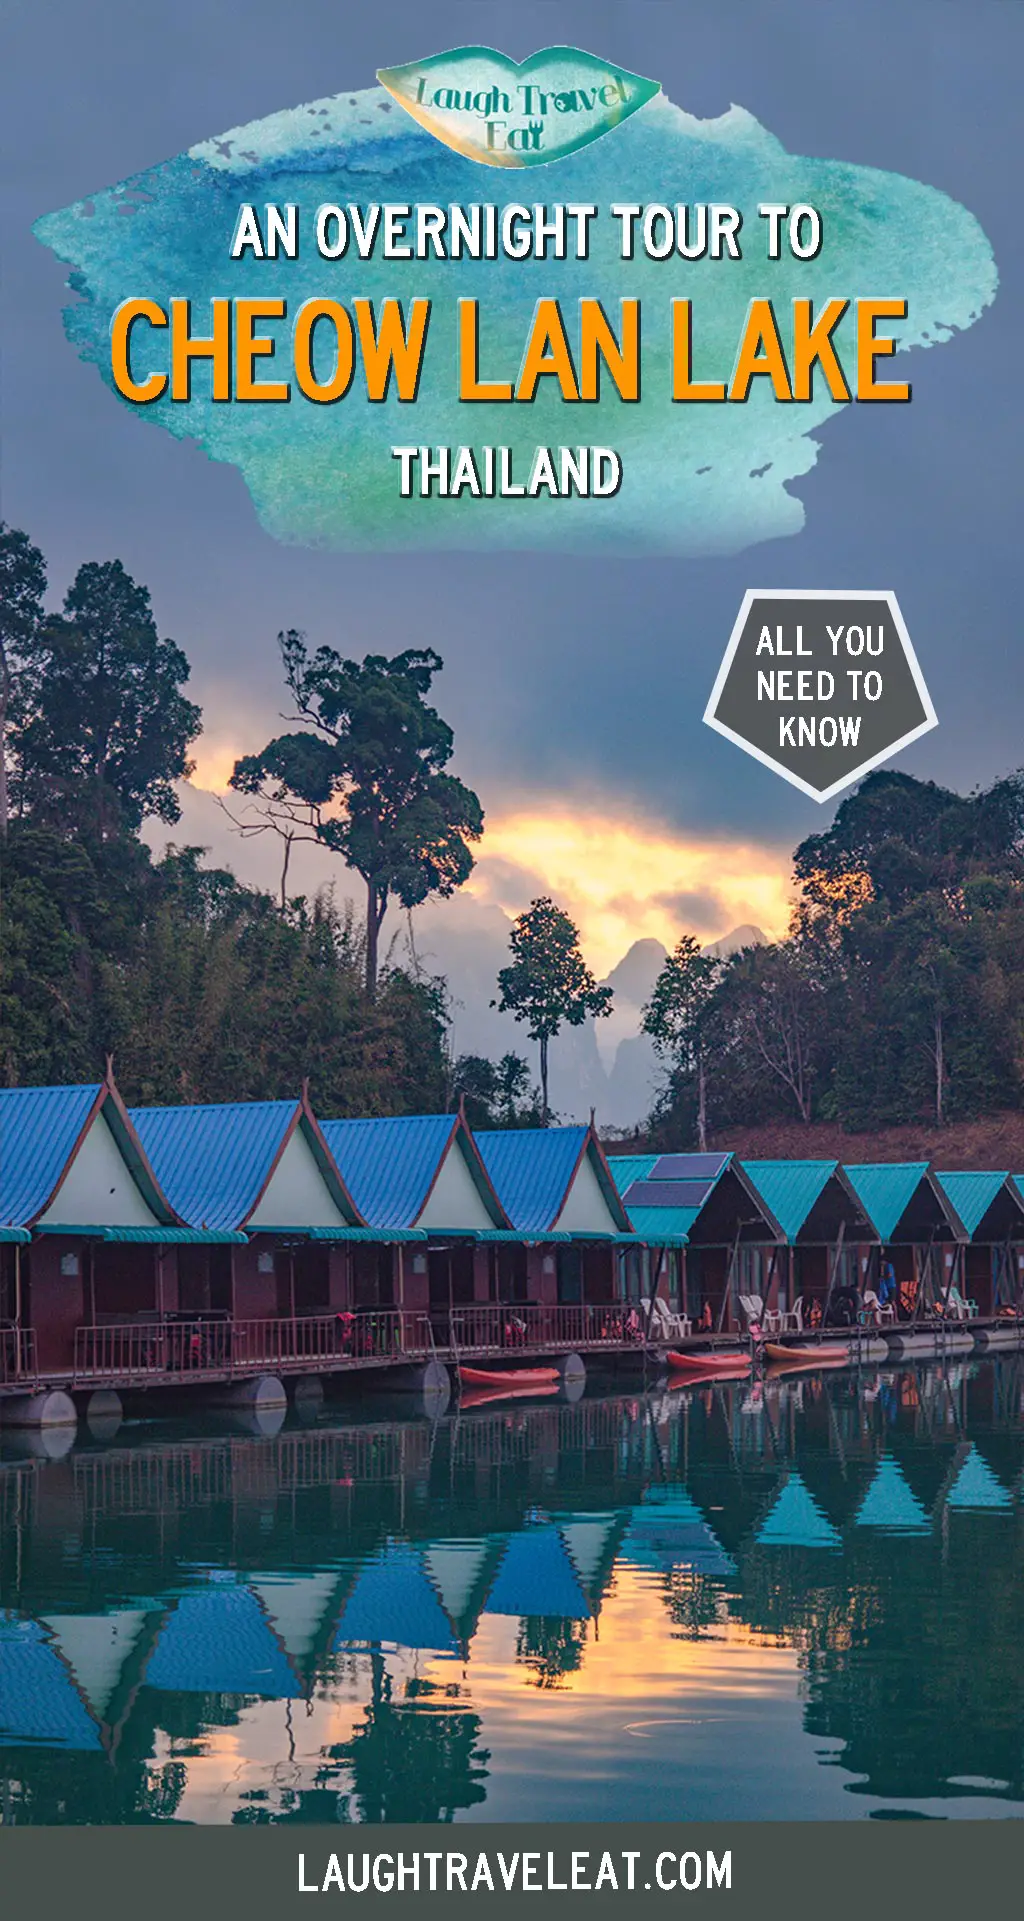 If there is one thing you can do in Khao Sok, make it the Cheow Lan Lake overnight tour. Formed as a result of the building of Ratchaprapha Dam in the 70s, it is surrounded by beautiful limestone mountains, formations, and hidden caves. The overnight lake tour takes you into the jungle, caves, and staying in an overwater raft house. Here’s all you need to know about the Cheow Lan Lake tour: #KhaoSok #CheowLanLake #Thailand